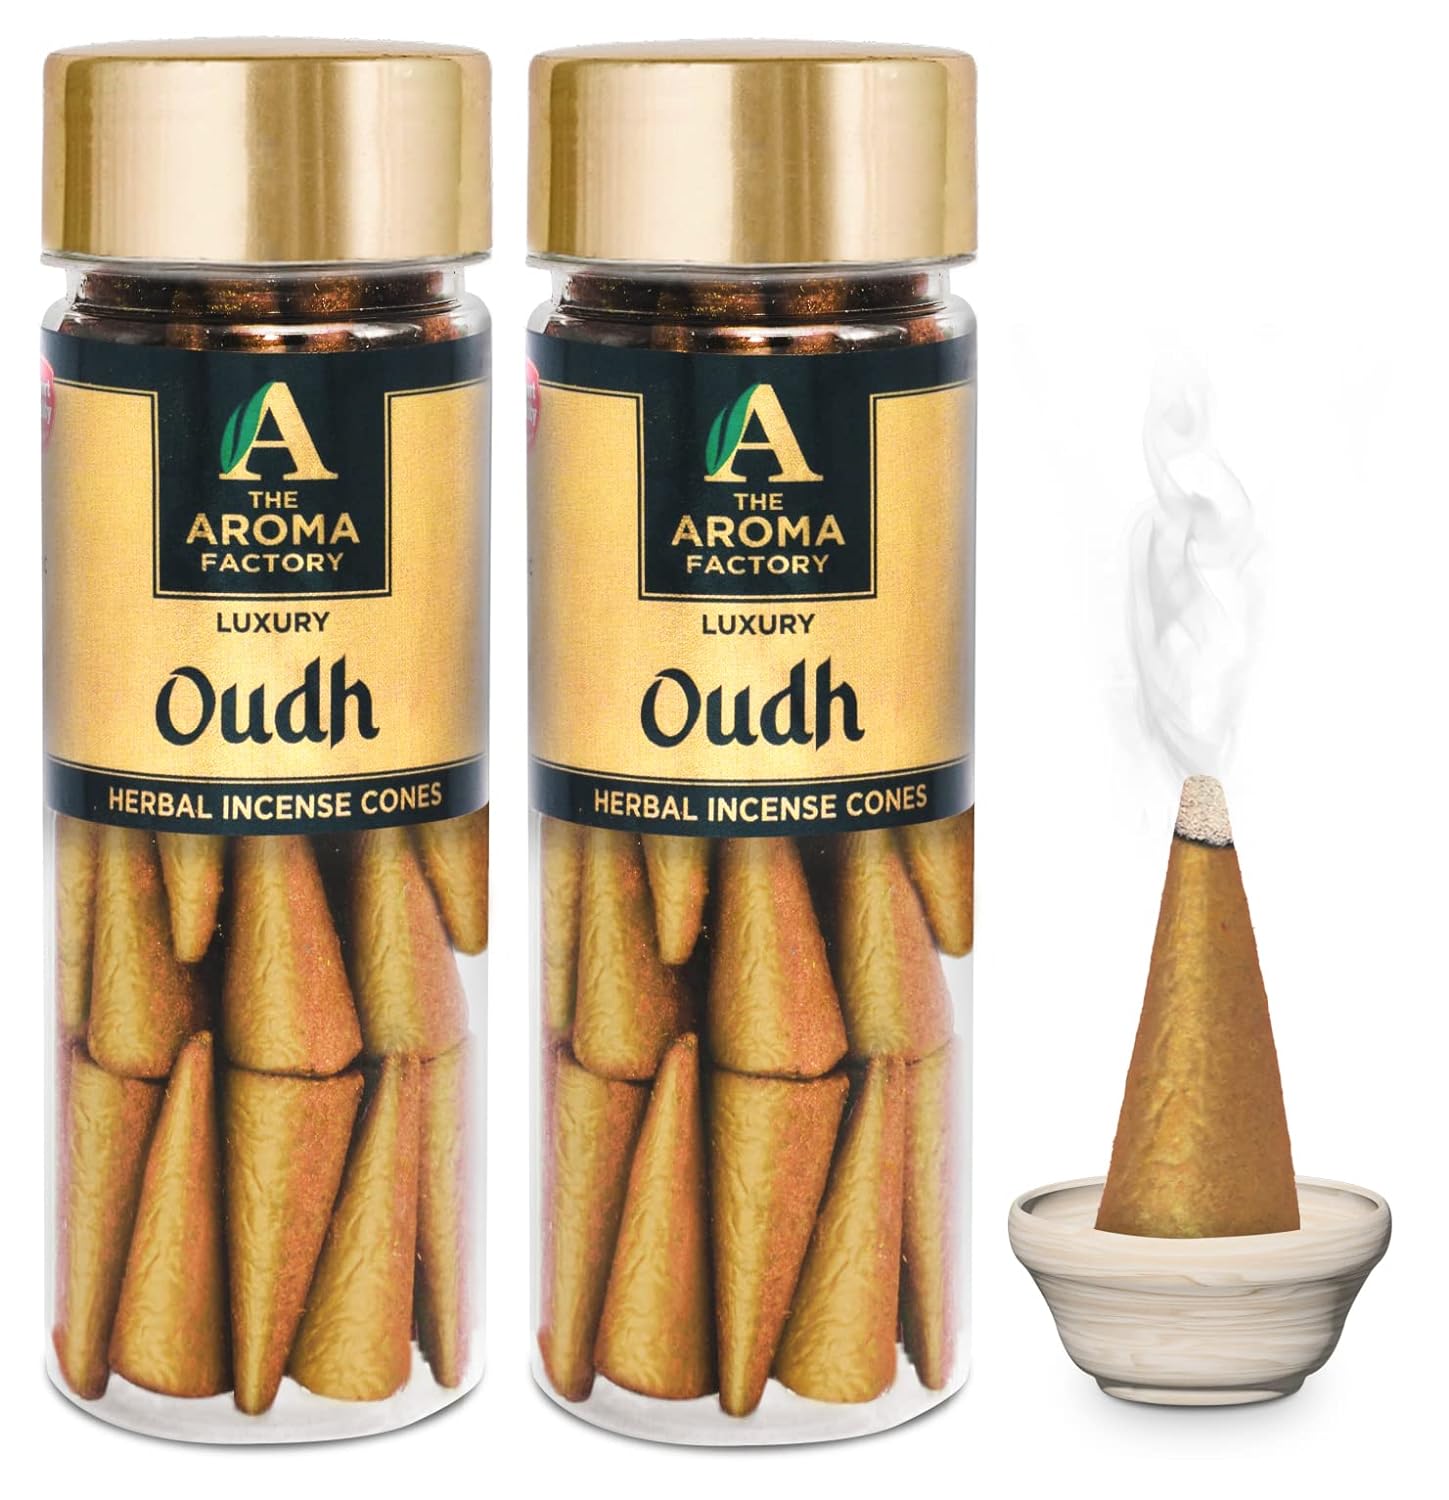 The Aroma Factory Incense Dhoop Cone for Puja, Oudh (100% Herbal & 0% Charcoal) 2 Bottles x 30 Cones